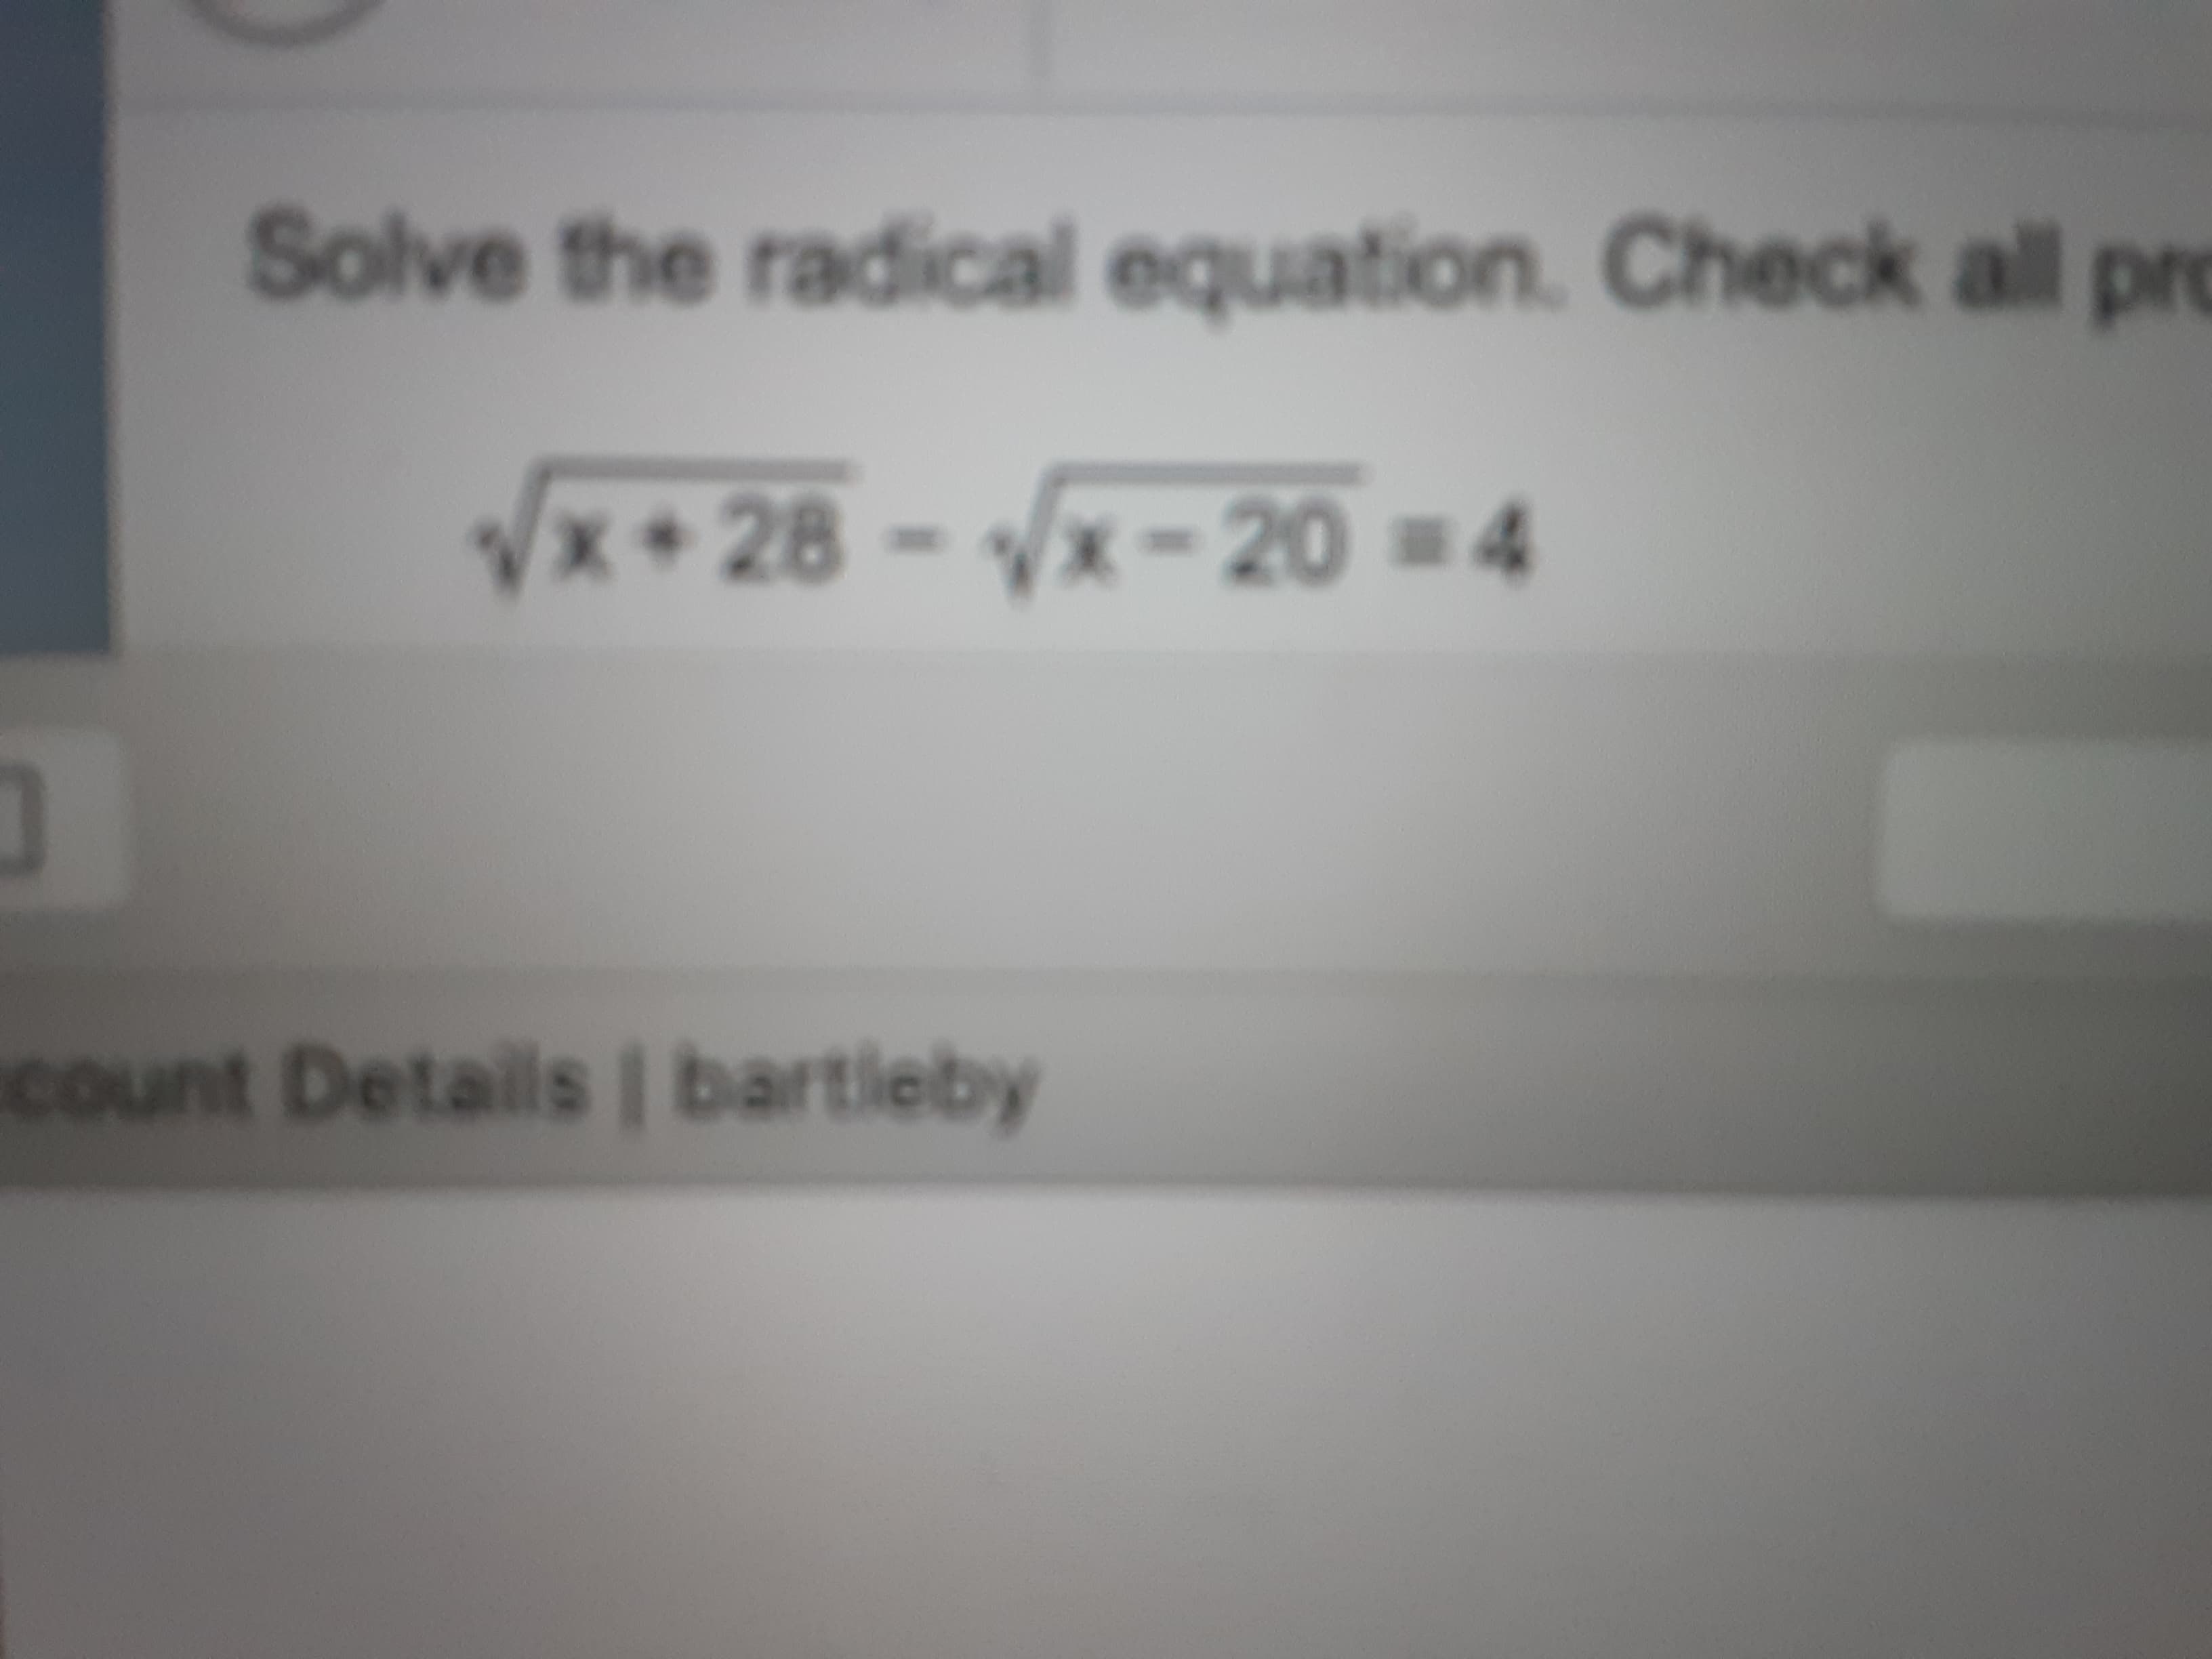 Solve the radical equation. Check all pro
x+ 28-x-20 4
count Details bartleby
